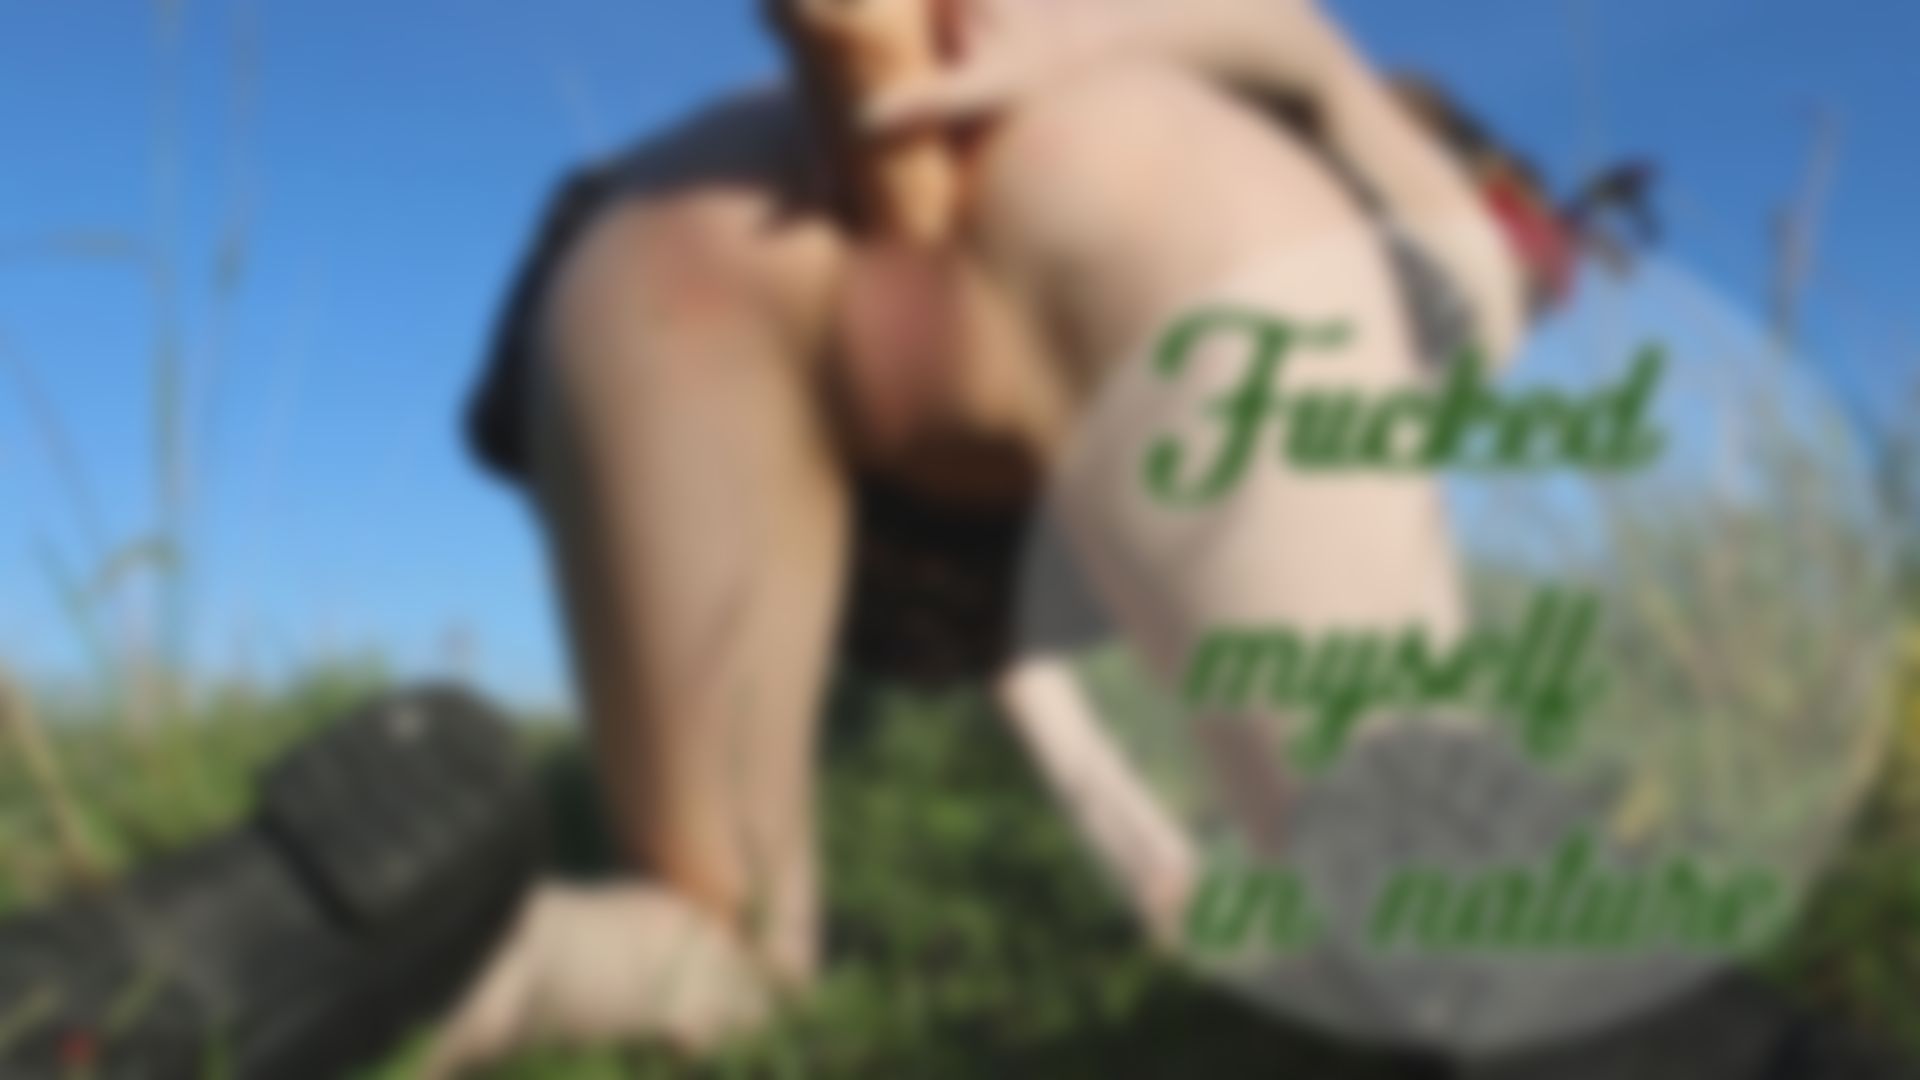  : Fucked myself in nature